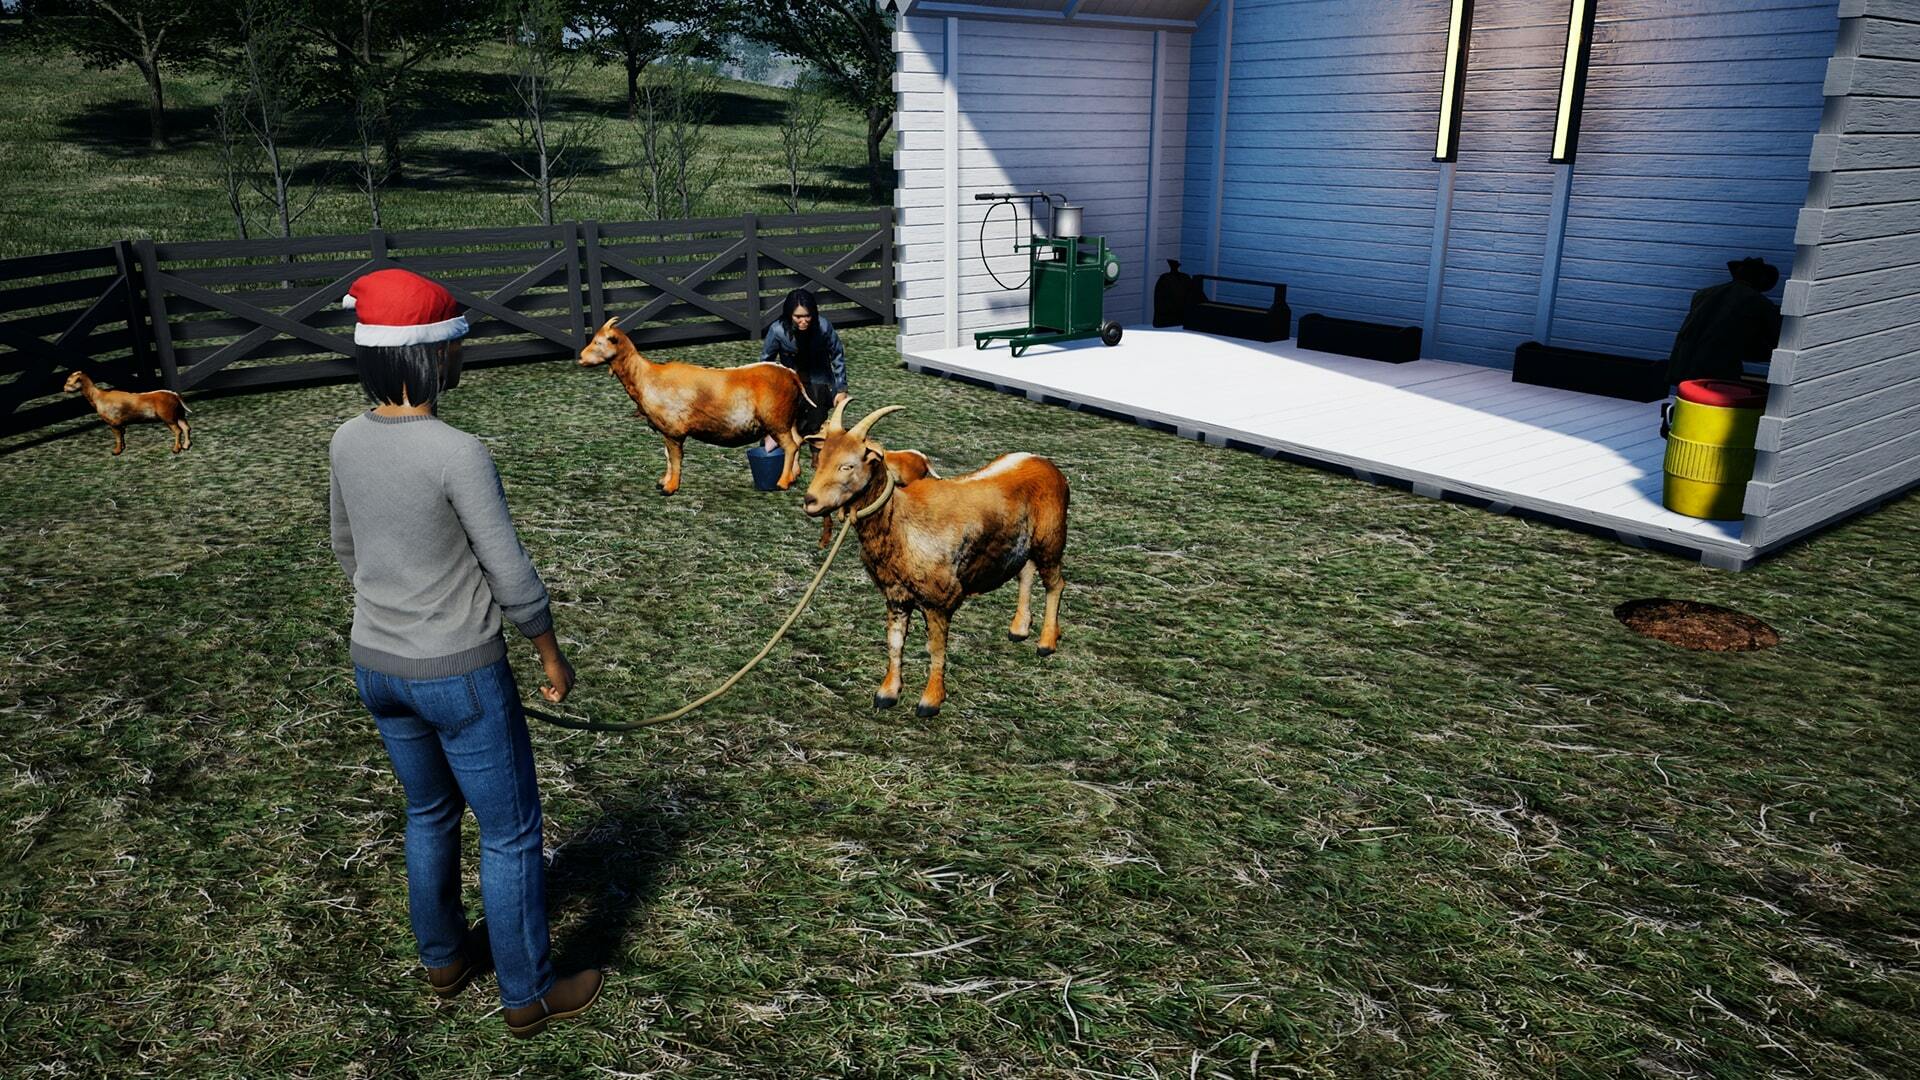 Steam :: Ranch Simulator :: UPDATE NOW LIVE  Goats, Bees, Transport  Trailers, Banks and Loans!